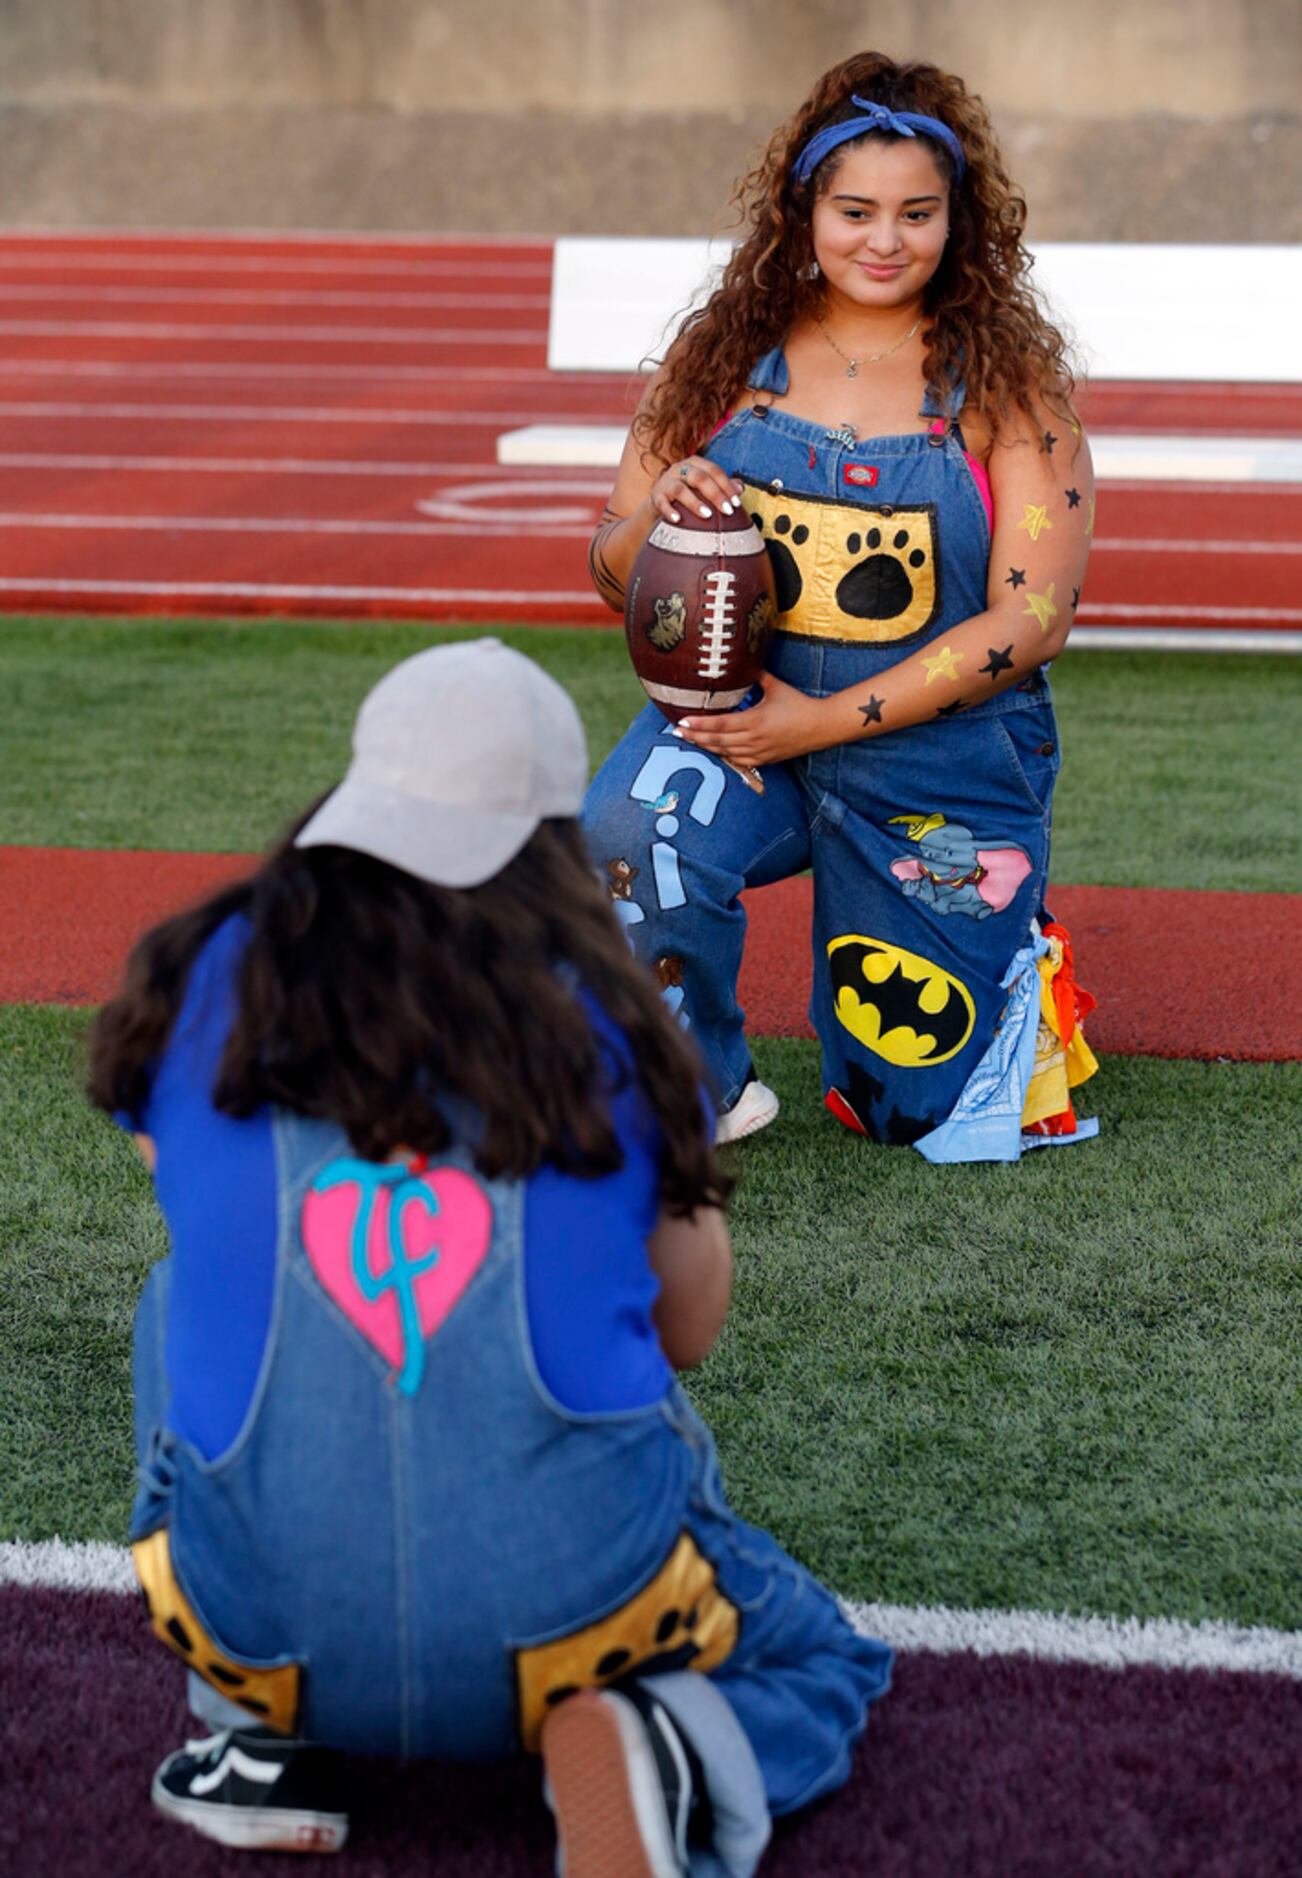 Irving spirit squad member Jennifer Ventera, right, poses with a football as another member...